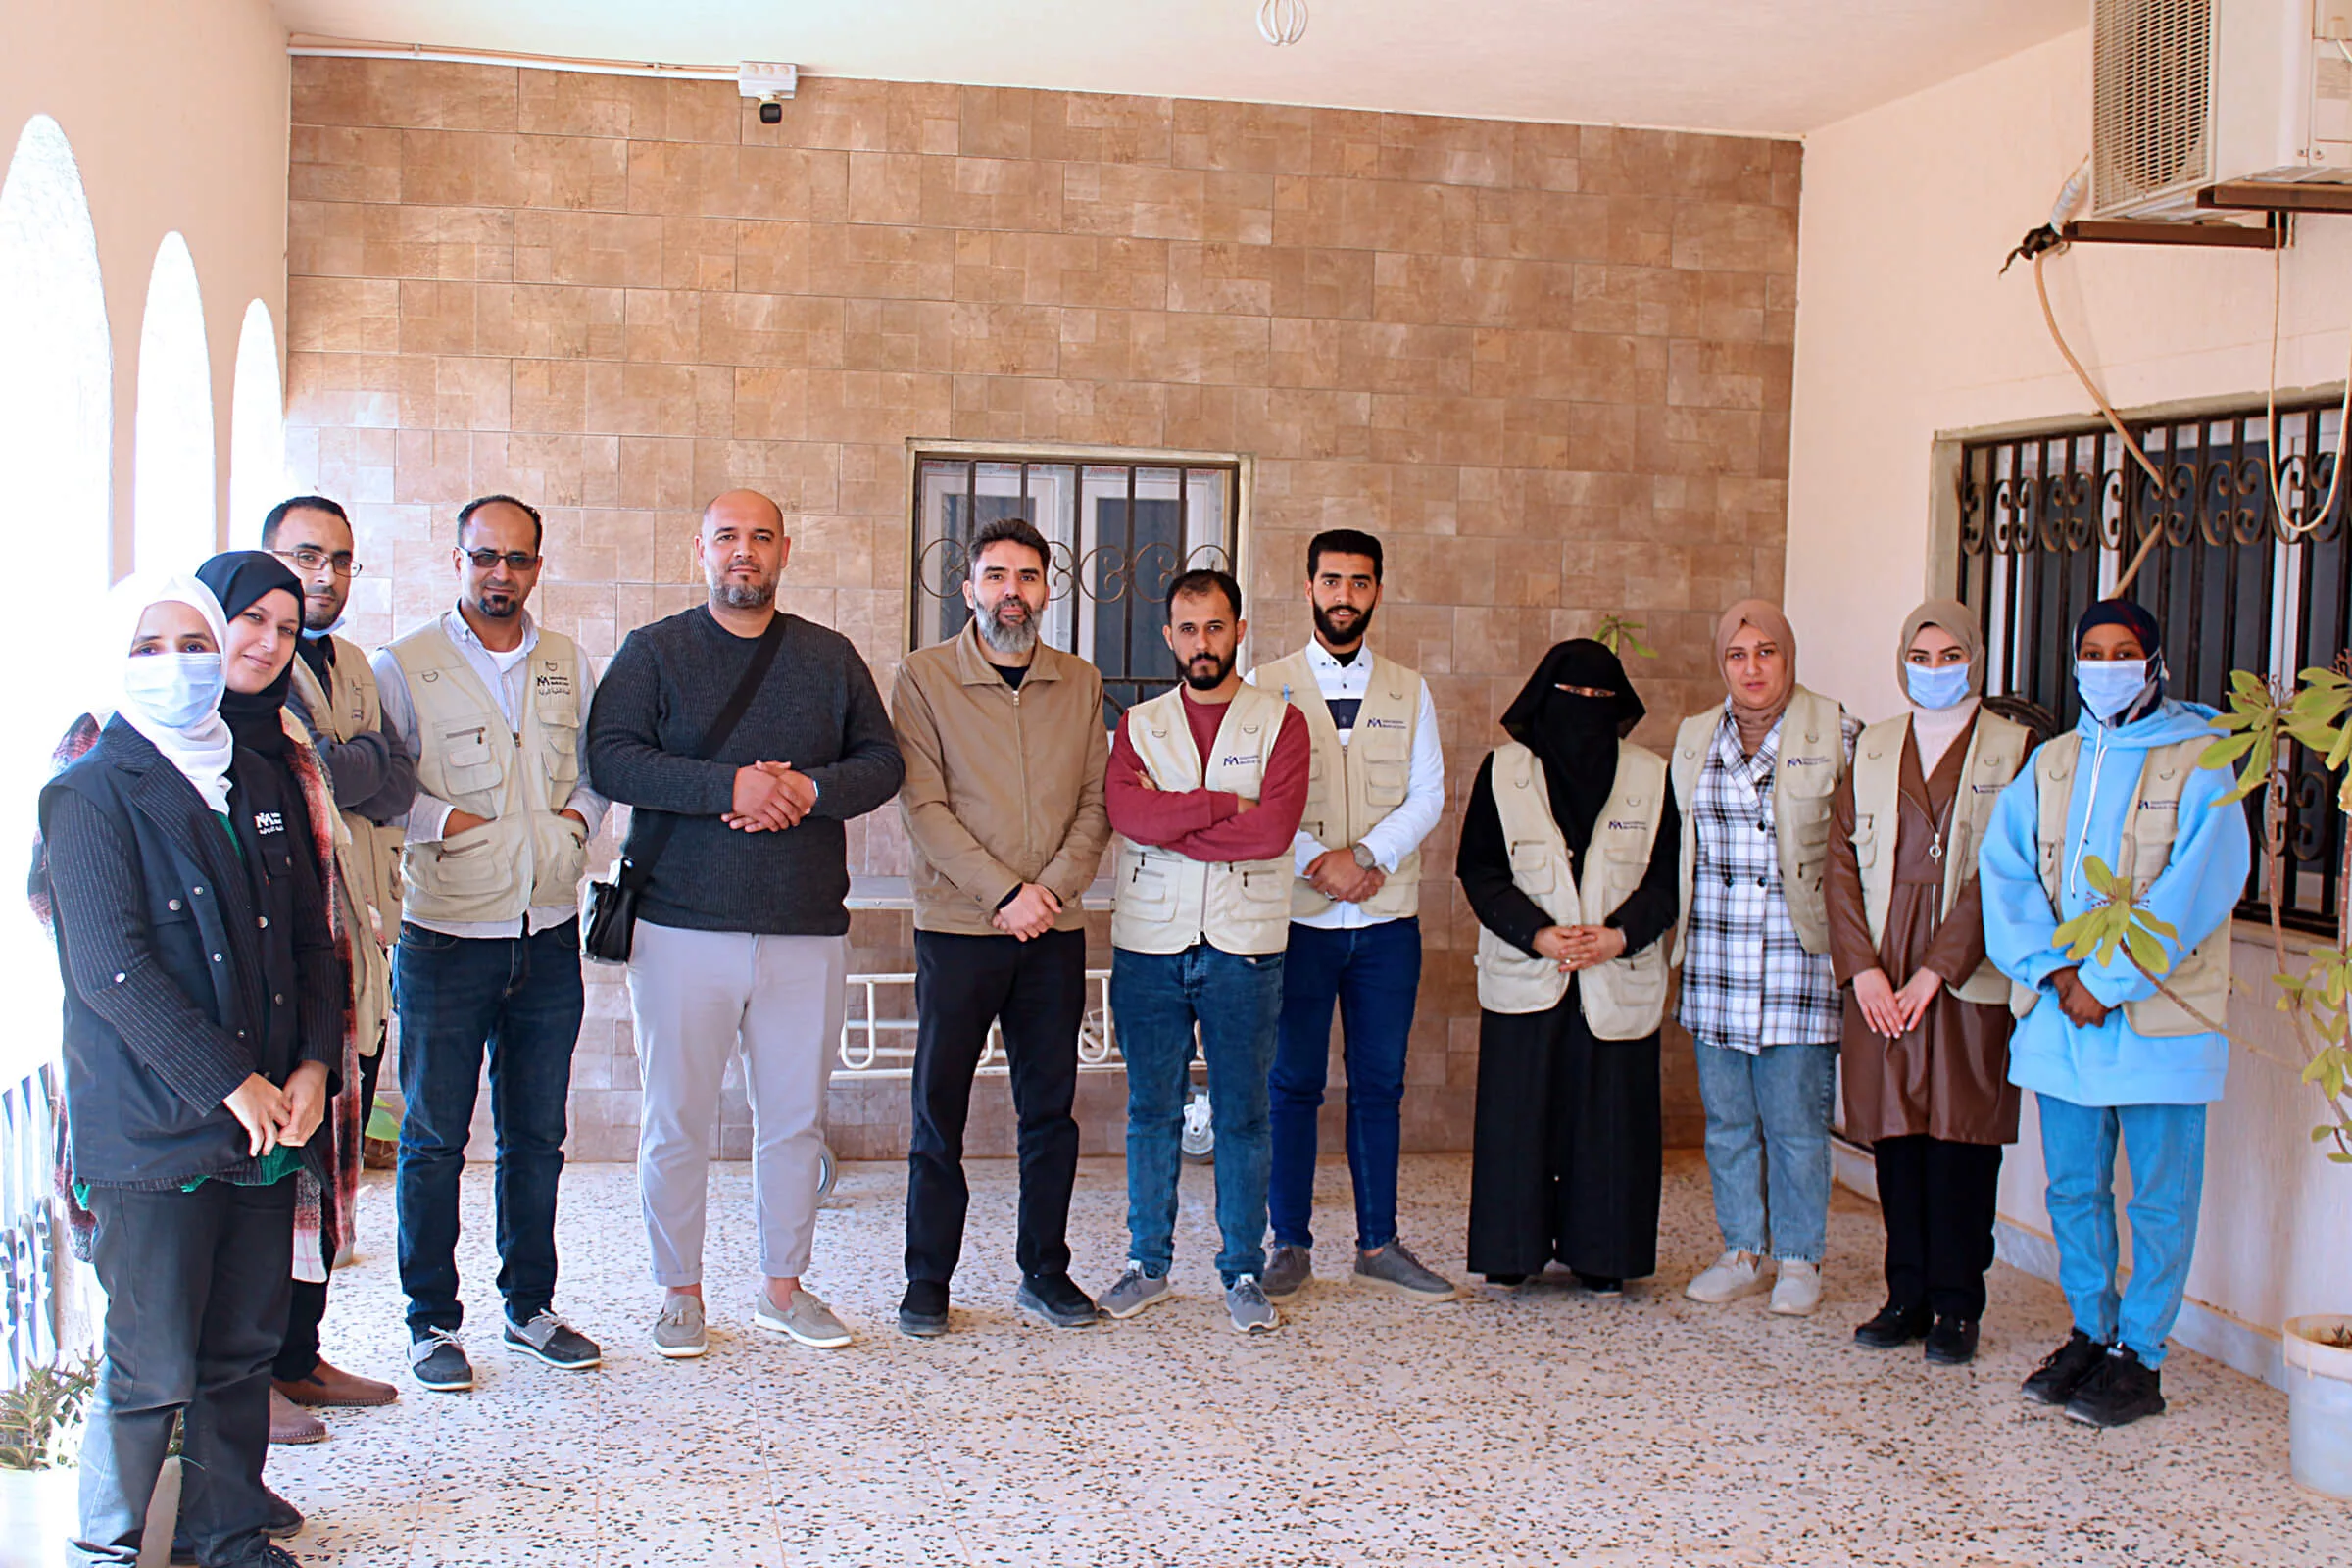 Several International Medical Corps staff members, including the emergency medical team, stand outside the Shuhada Algurgof primary health center. Dr. Mira is third from the right.